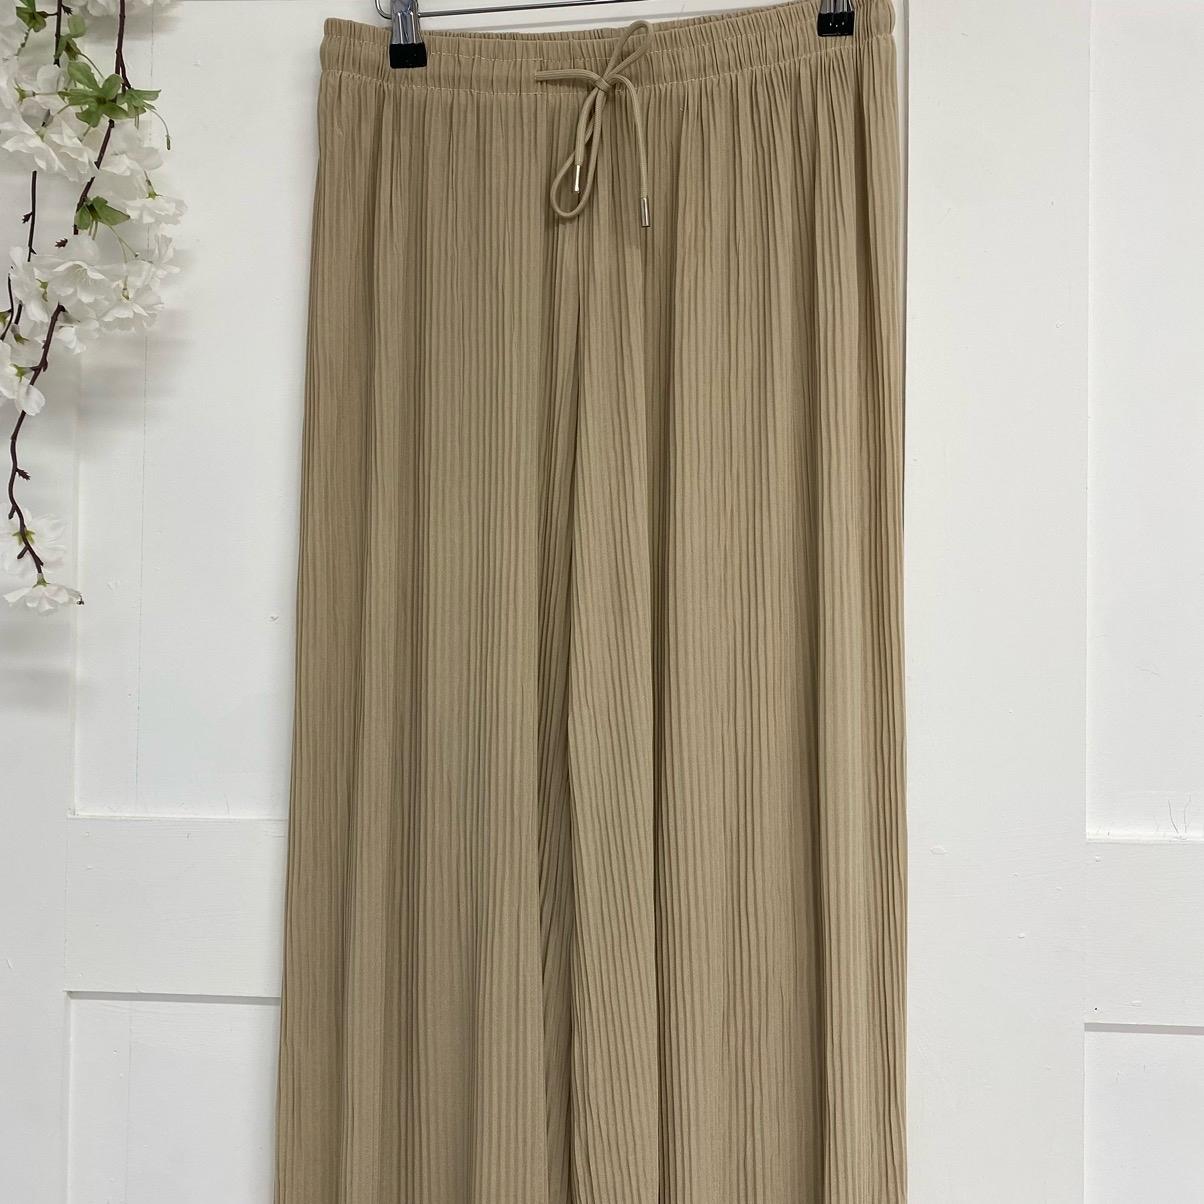 Patsy: Plisse wide leg trousers with elasticated waist. One size 12-22